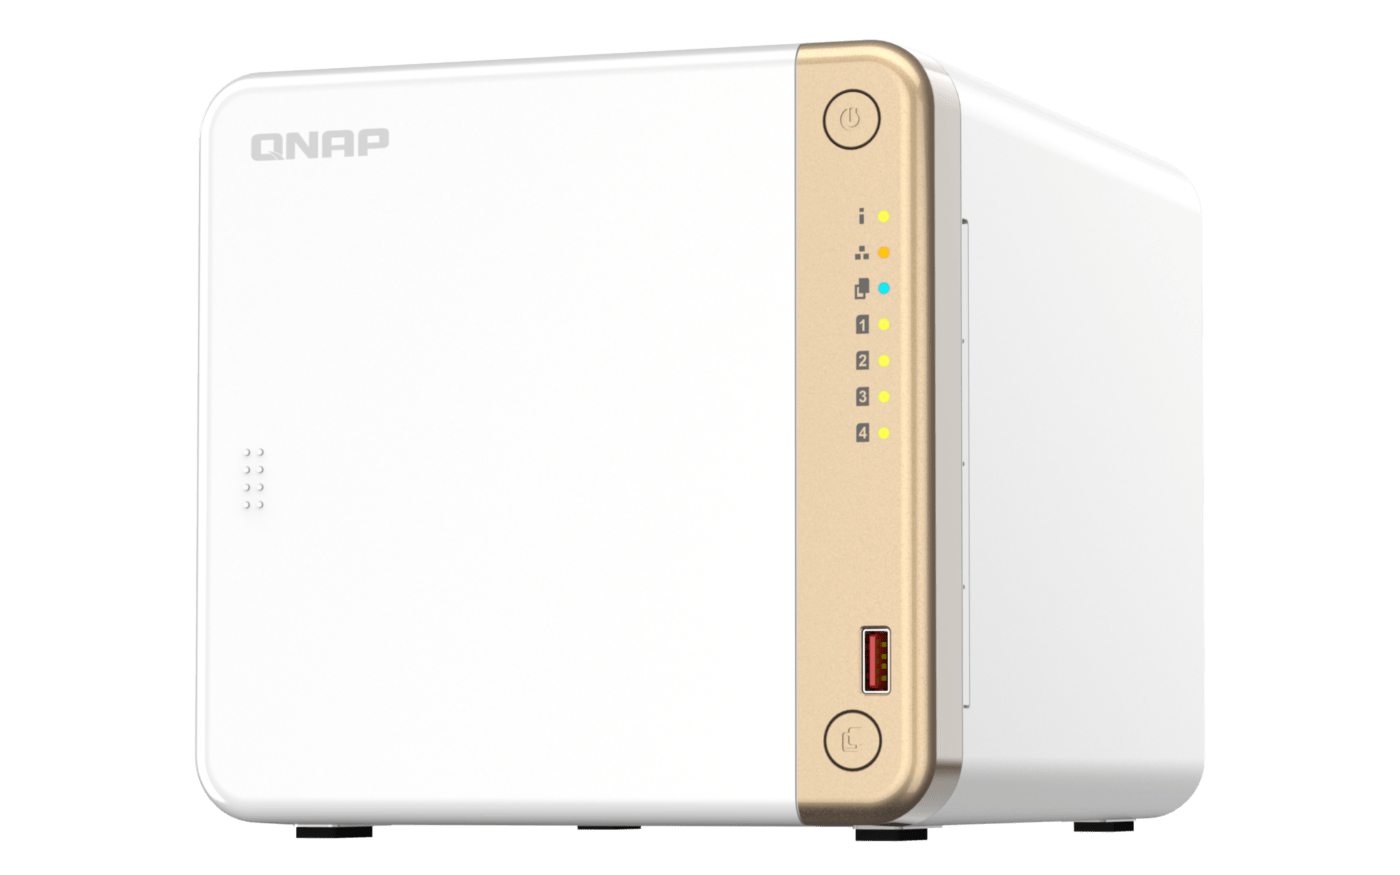 QNAP: New TS-x62 Series Released